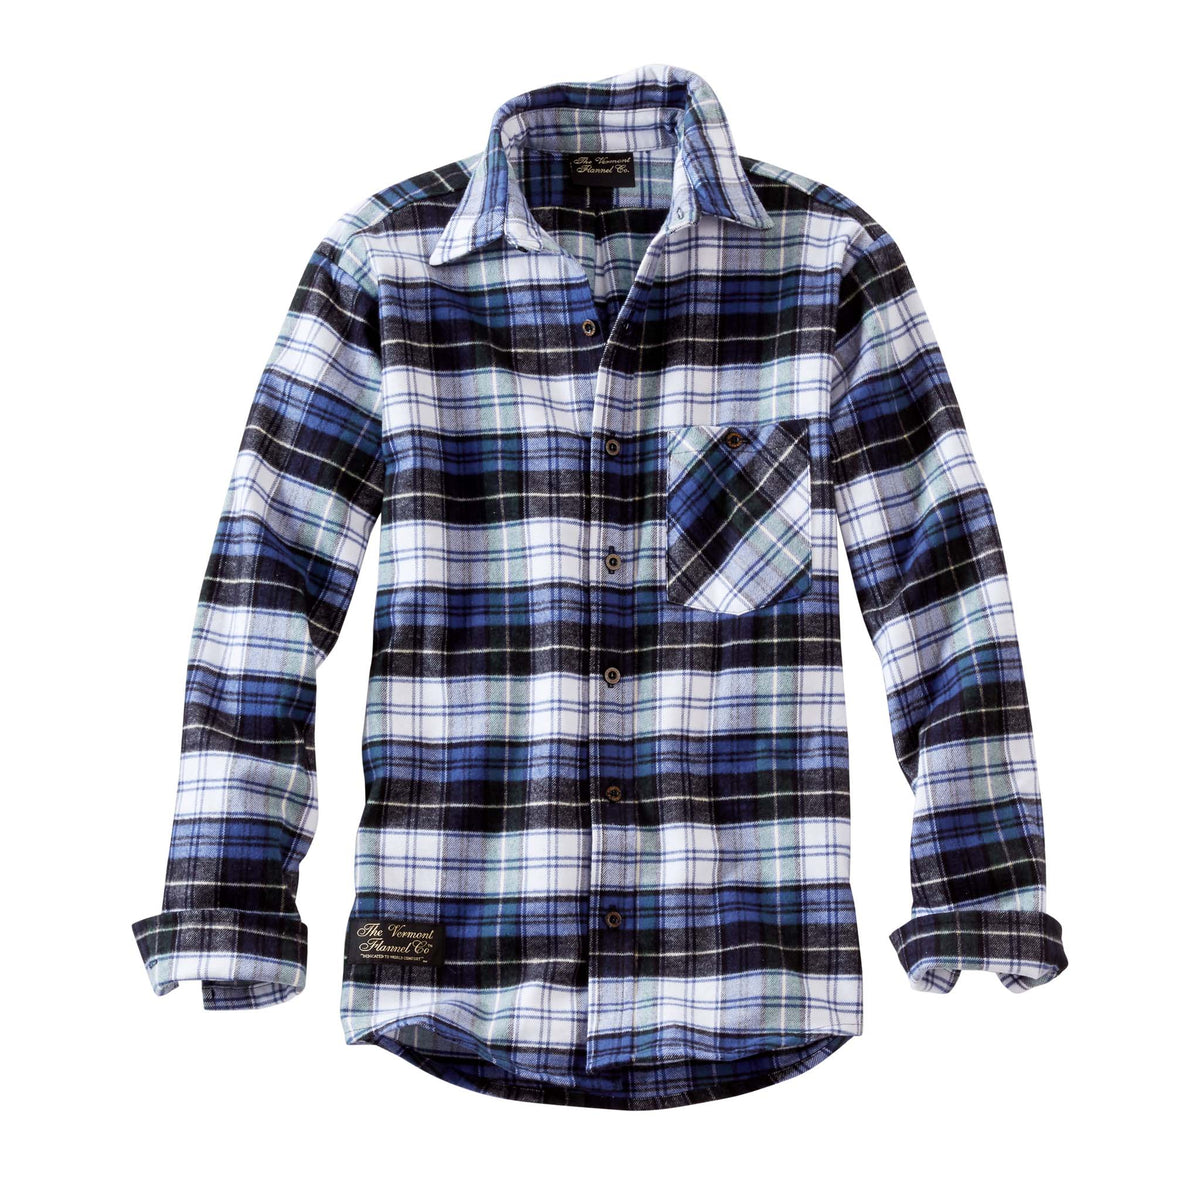 Men's Flannel Shirts Made in the USA - All American Clothing Co